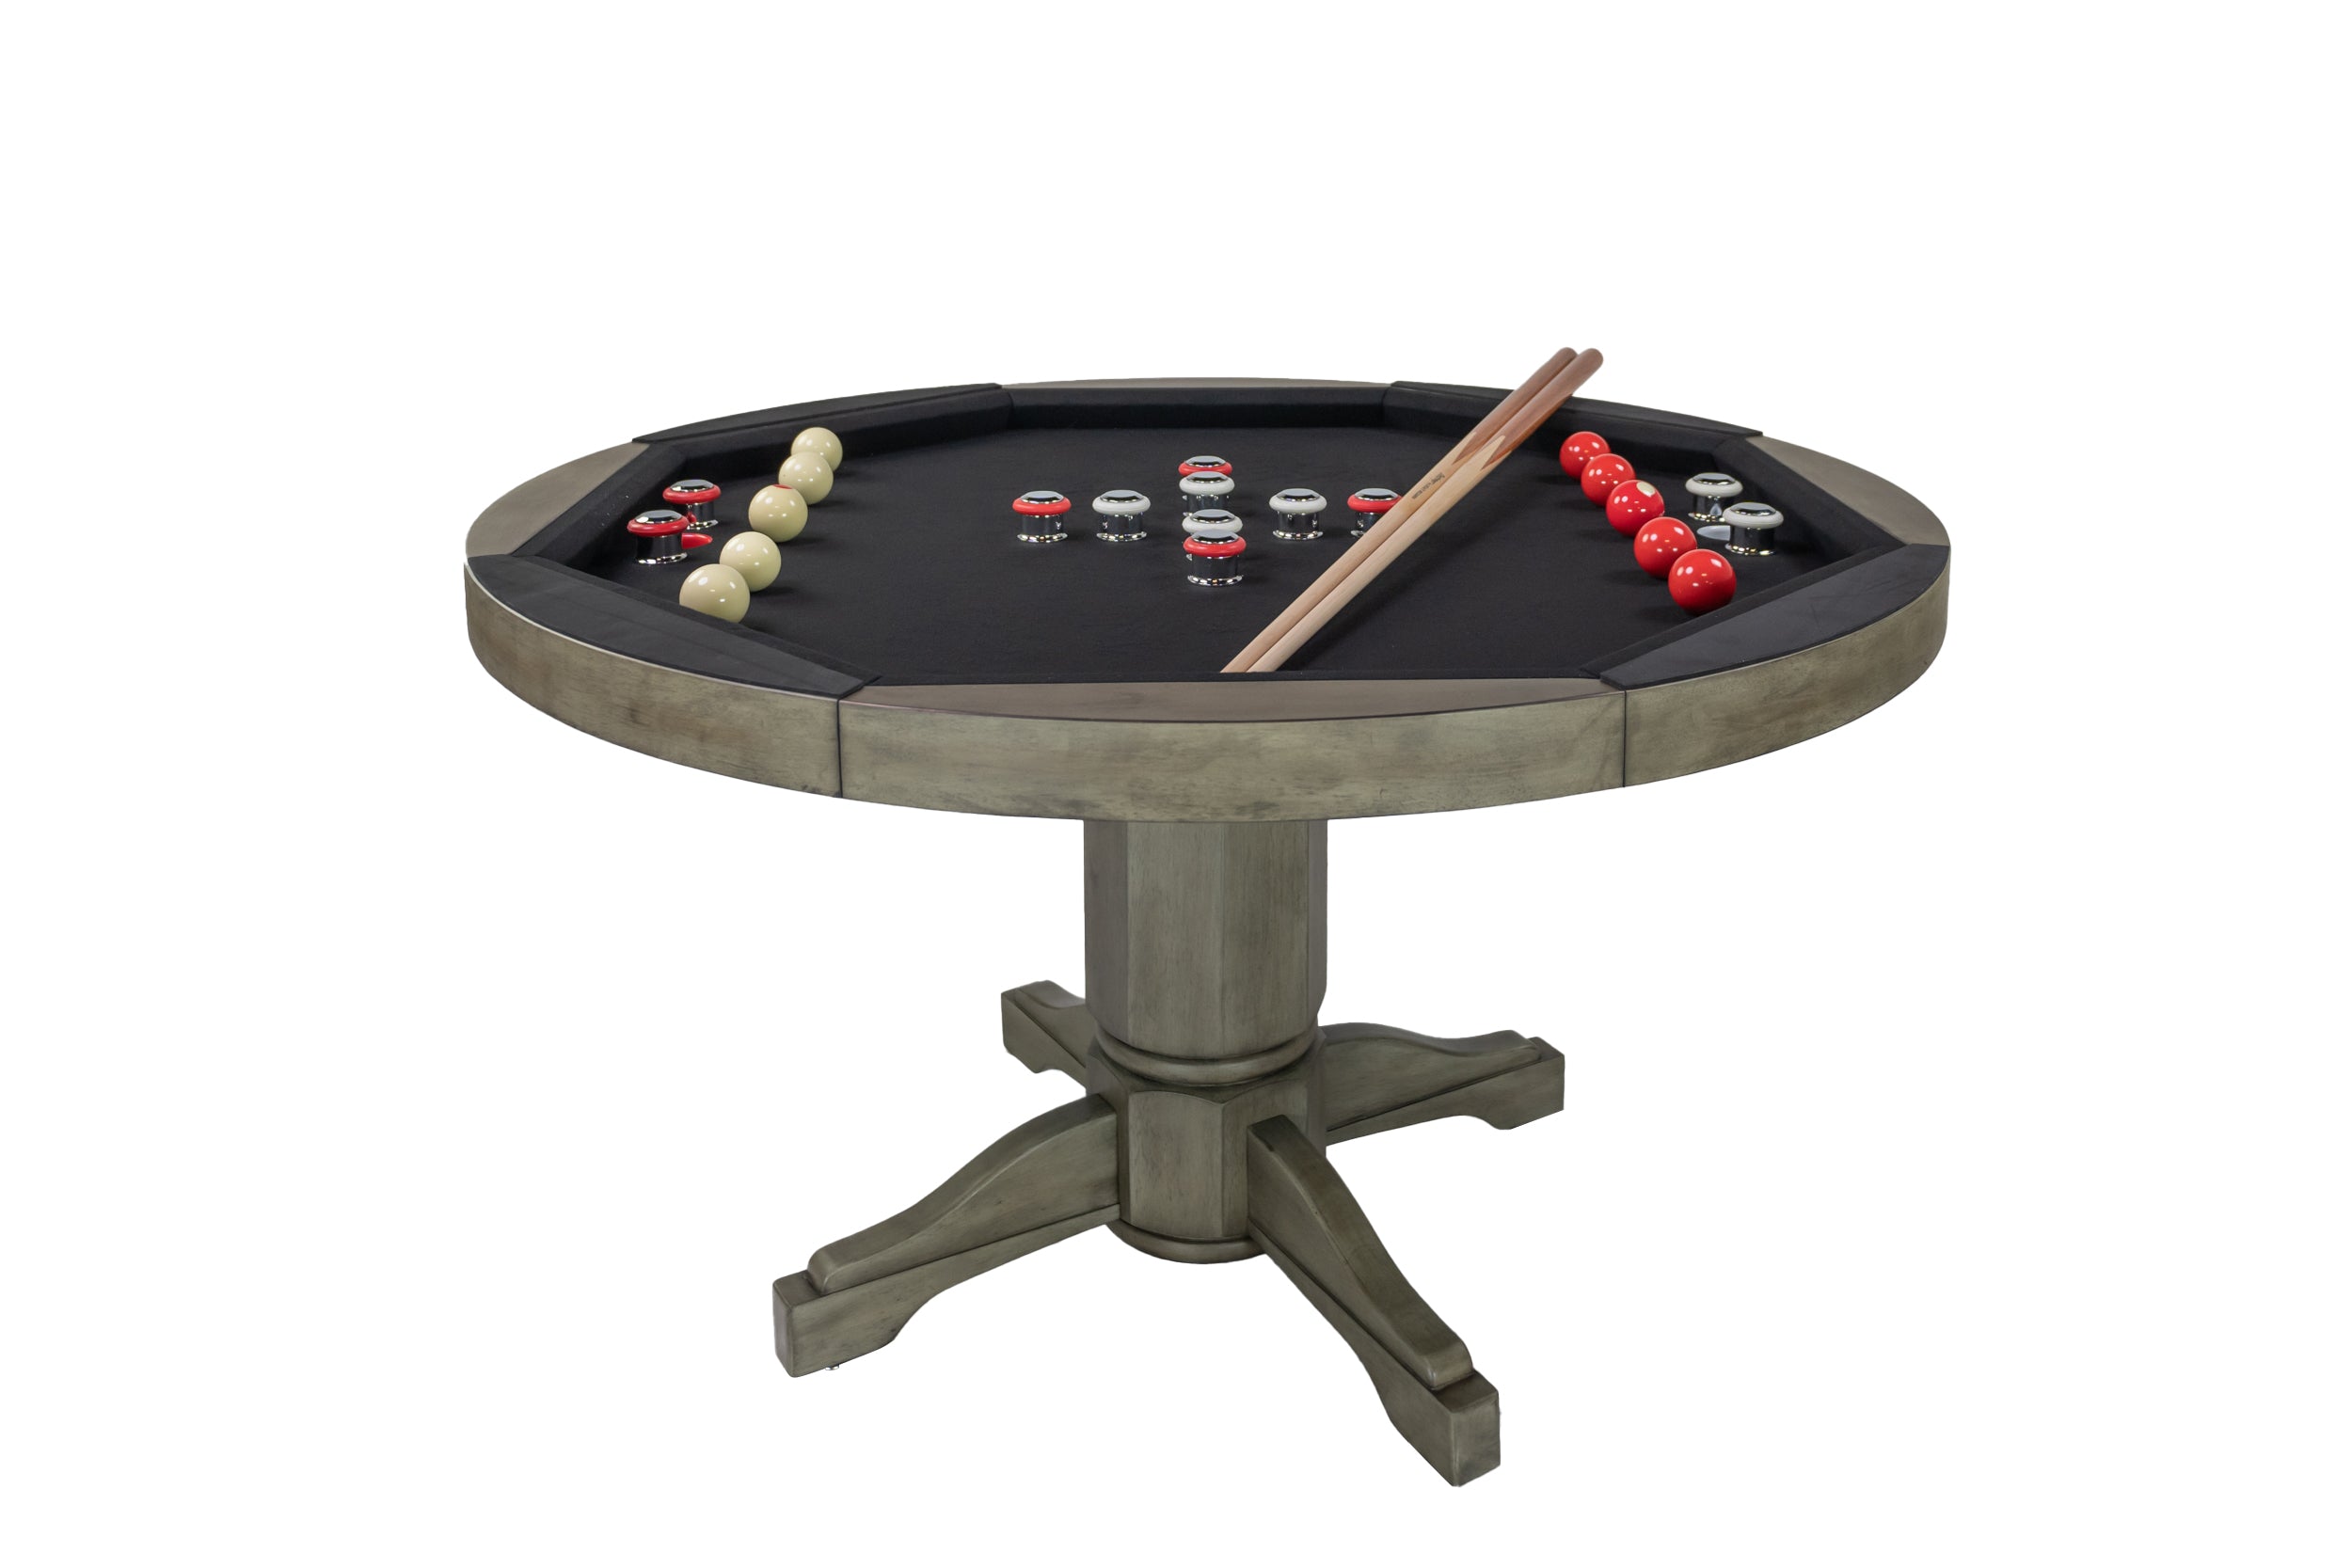 Legacy Billiards Heritage 3 in 1 Game Table with Poker, Dining and Bumper Pool in Overcast Finish - Bumper Pool Table with Pool Balls and Cues